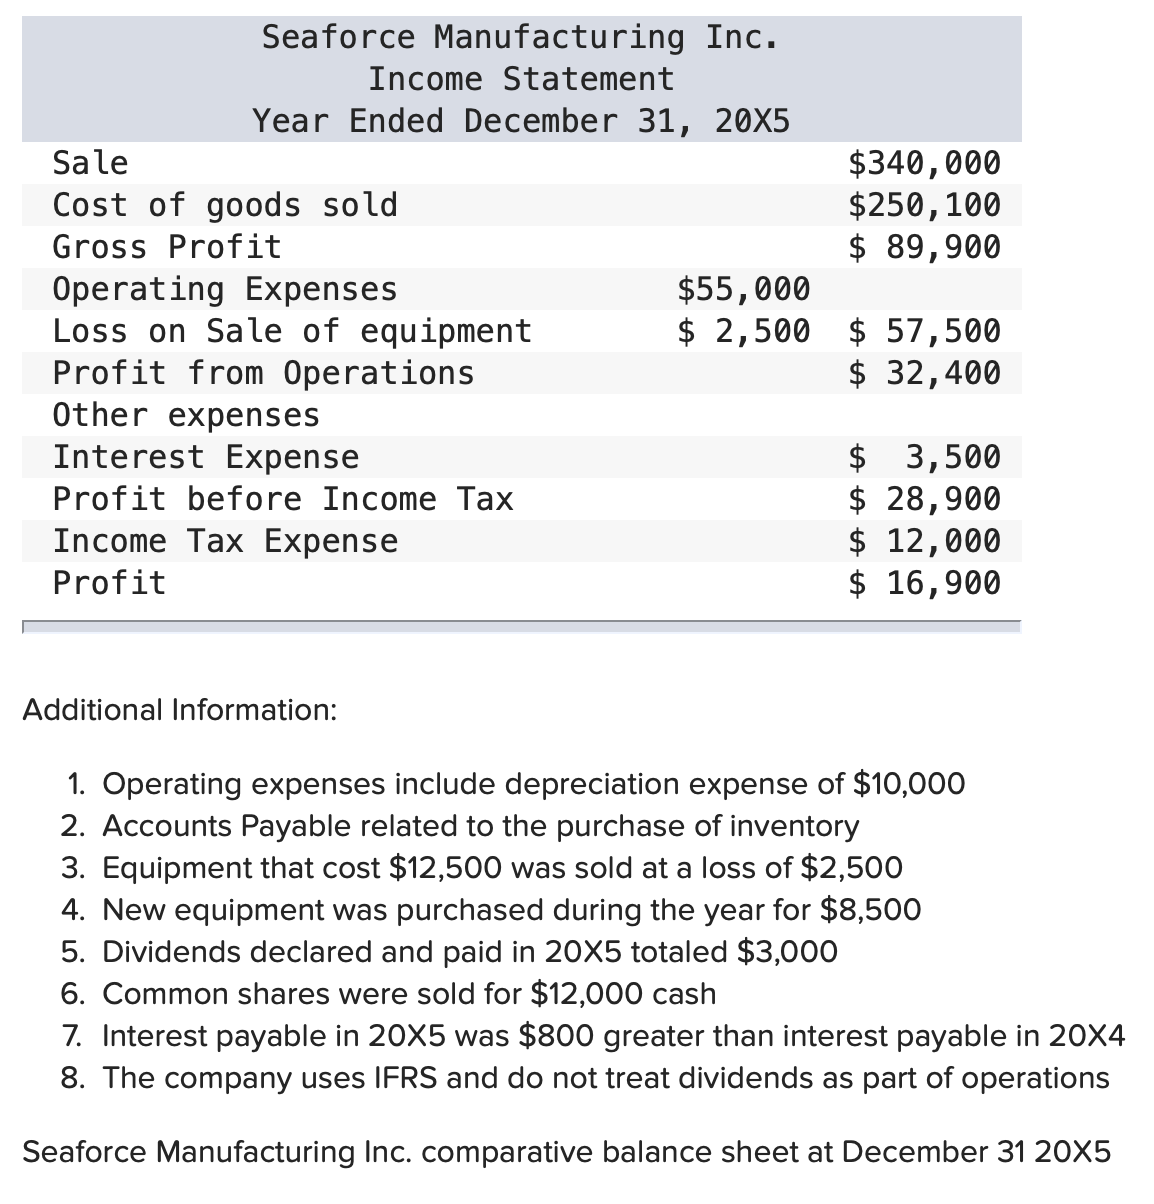 Seaforce Manufacturing Inc.
Income Statement
Year Ended December 31, 20X5
Sale
Cost of goods sold
Gross Profit
Operating Expenses
Loss on Sale of equipment
Profit from Operations
Other expenses
Interest Expense
Profit before Income Tax
Income Tax Expense
Profit
Additional Information:
$55,000
$ 2,500
$340,000
$250, 100
$ 89,900
$57,500
$ 32,400
$ 3,500
$ 28,900
$ 12,000
$ 16,900
1. Operating expenses include depreciation expense of $10,000
2. Accounts Payable related to the purchase of inventory
3. Equipment that cost $12,500 was sold at a loss of $2,500
4. New equipment was purchased during the year for $8,500
5. Dividends declared and paid in 20X5 totaled $3,000
6. Common shares were sold for $12,000 cash
7. Interest payable in 20X5 was $800 greater than interest payable in 20X4
8. The company uses IFRS and do not treat dividends as part of operations
Seaforce Manufacturing Inc. comparative balance sheet at December 31 20X5